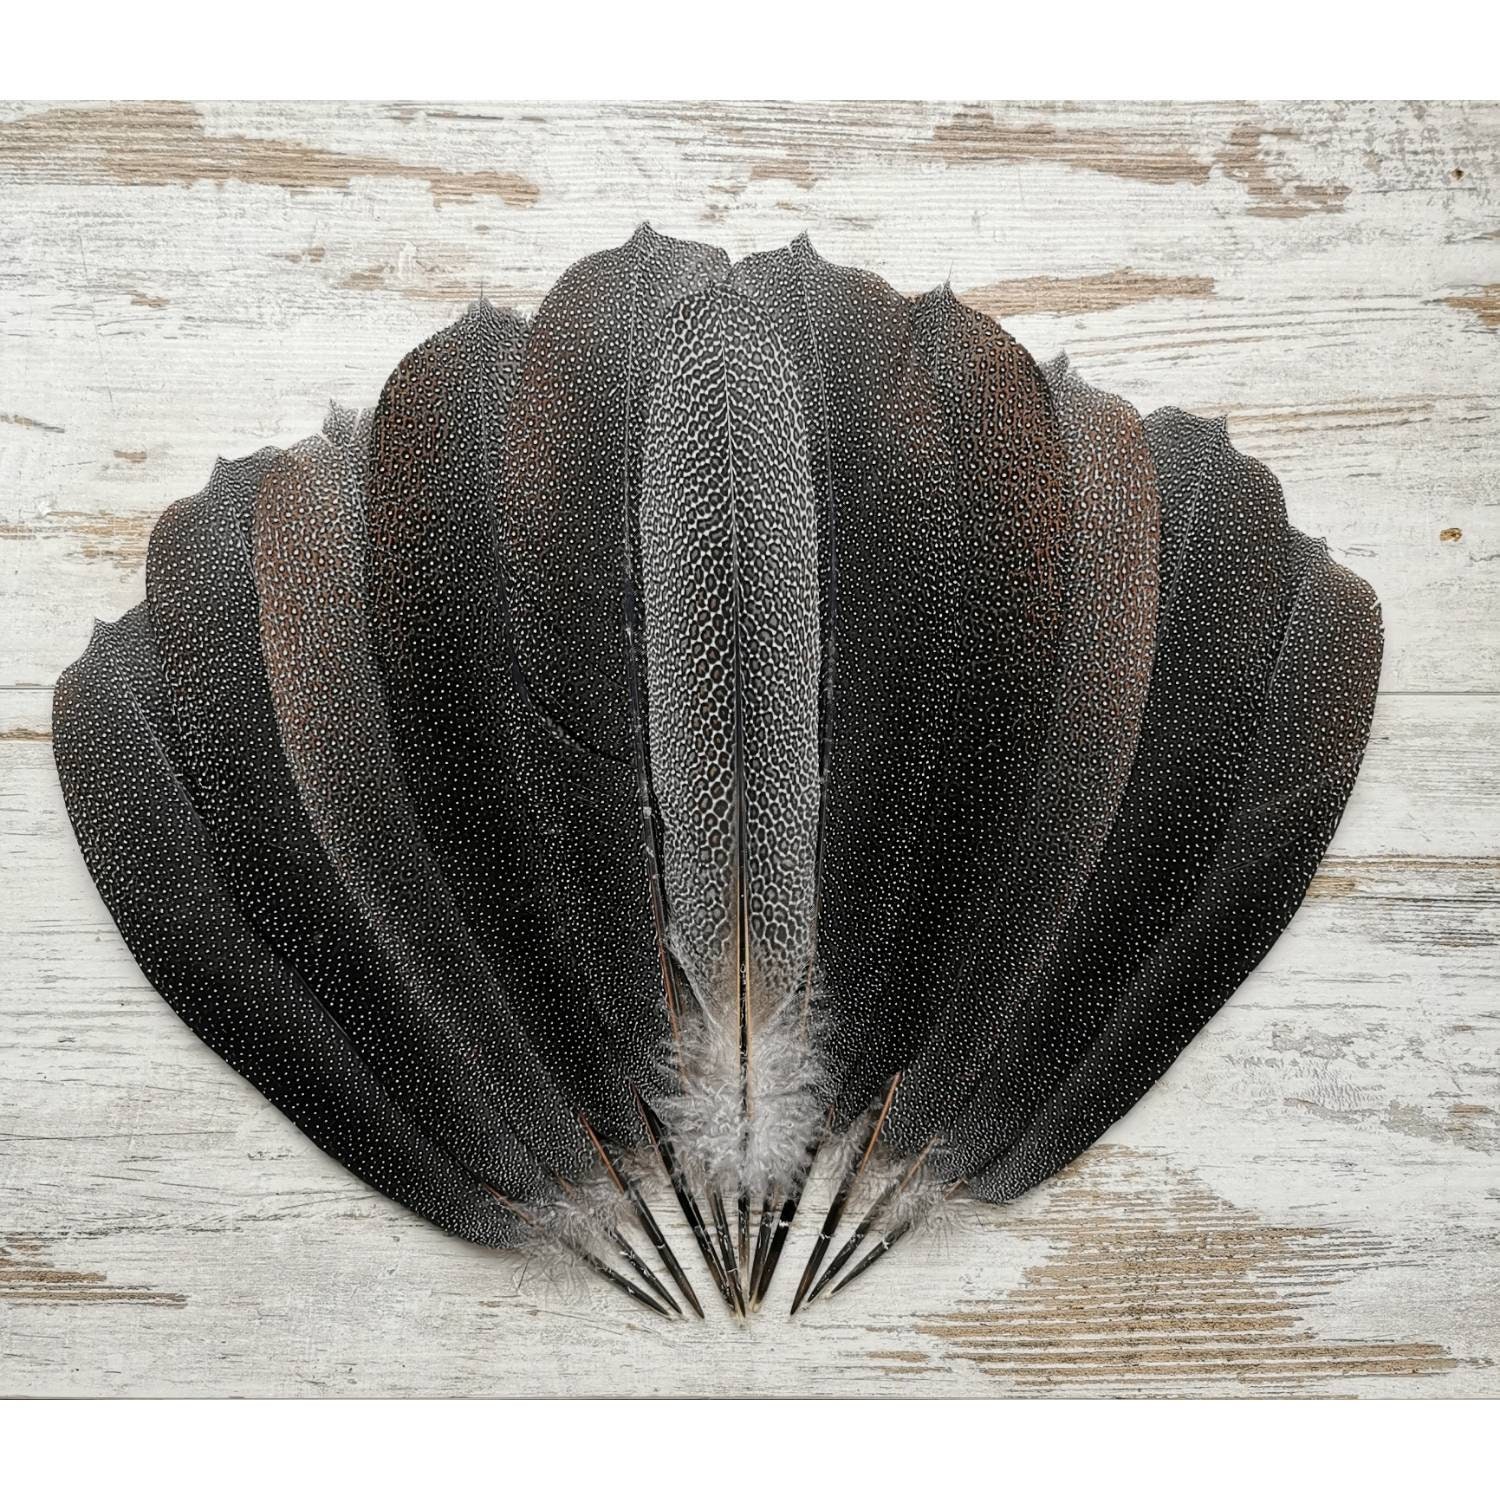 Wild Tail Feathers, 50 Pieces Natural Black and Brown Wild Merriam Turkey  Tail Wholesale Feathers bulk: 4009 -  Israel